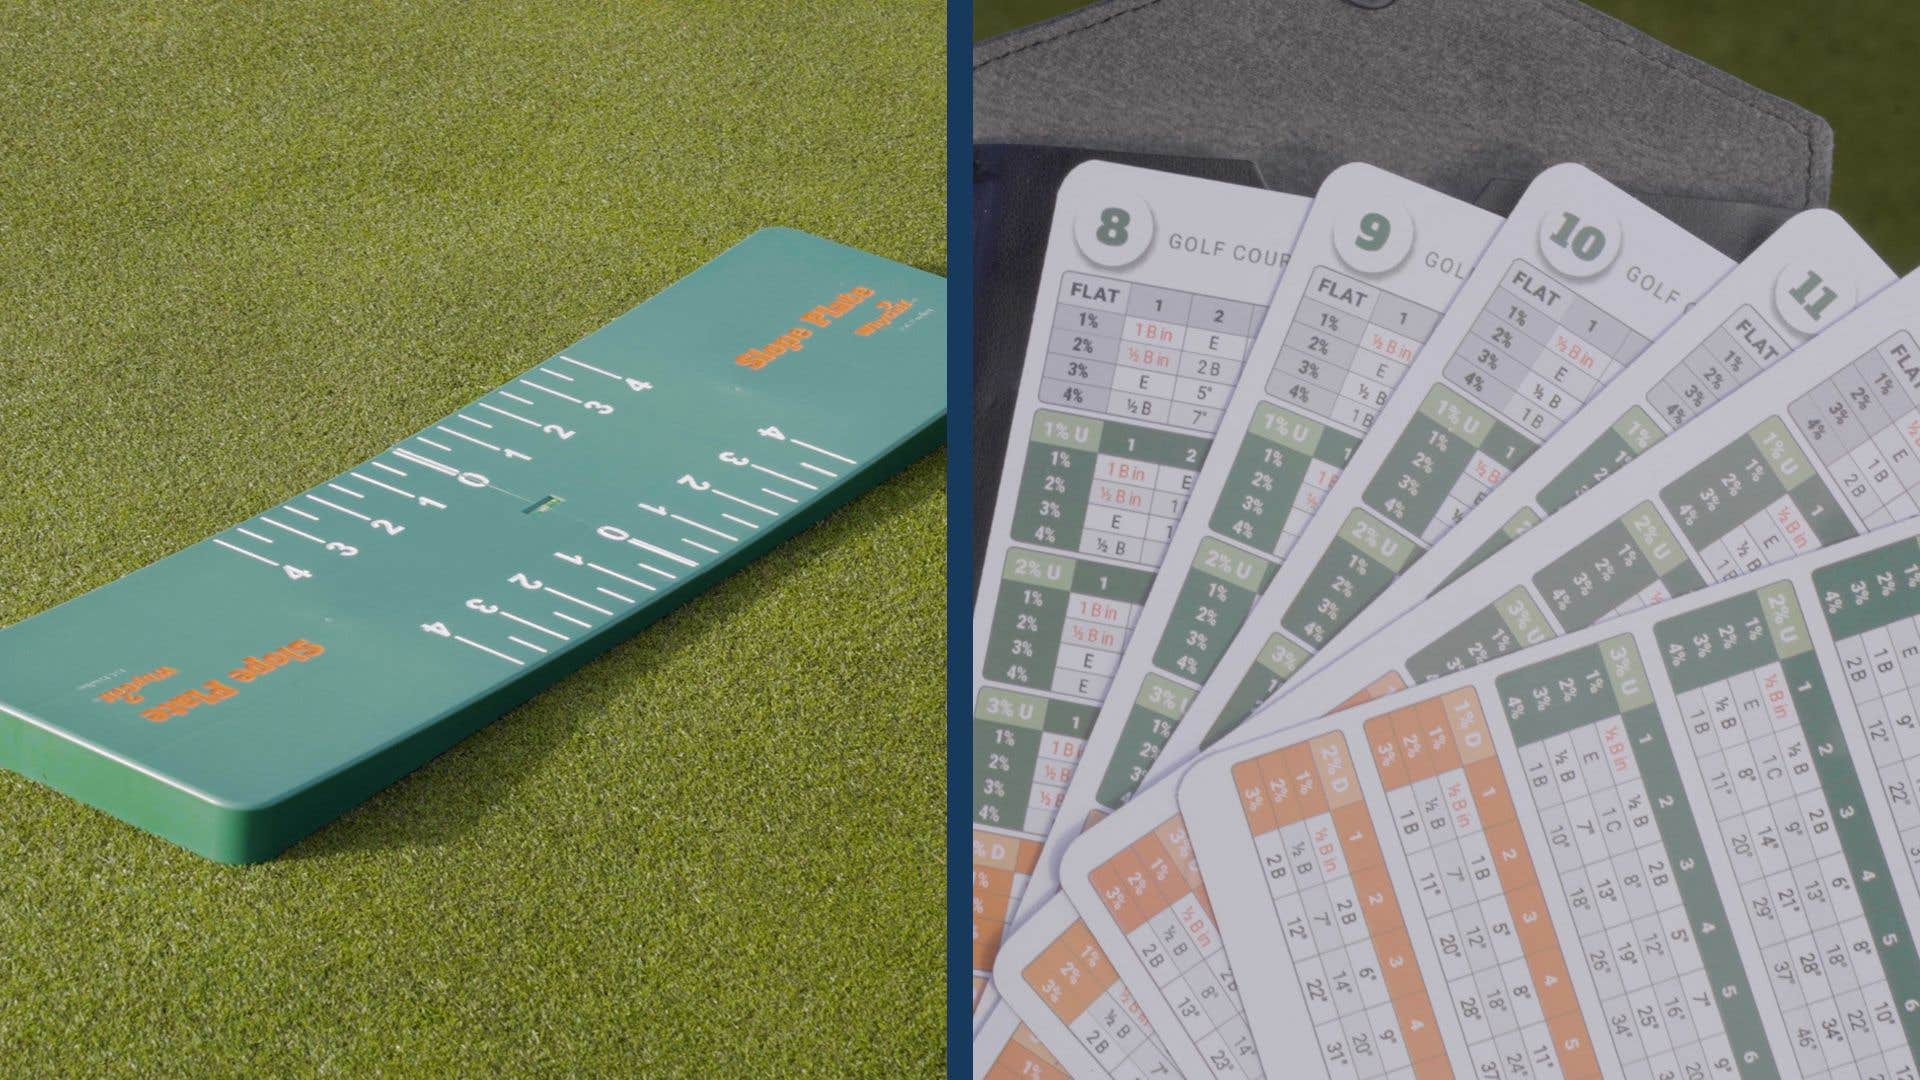 Learn to read greens with your feet using this training aid